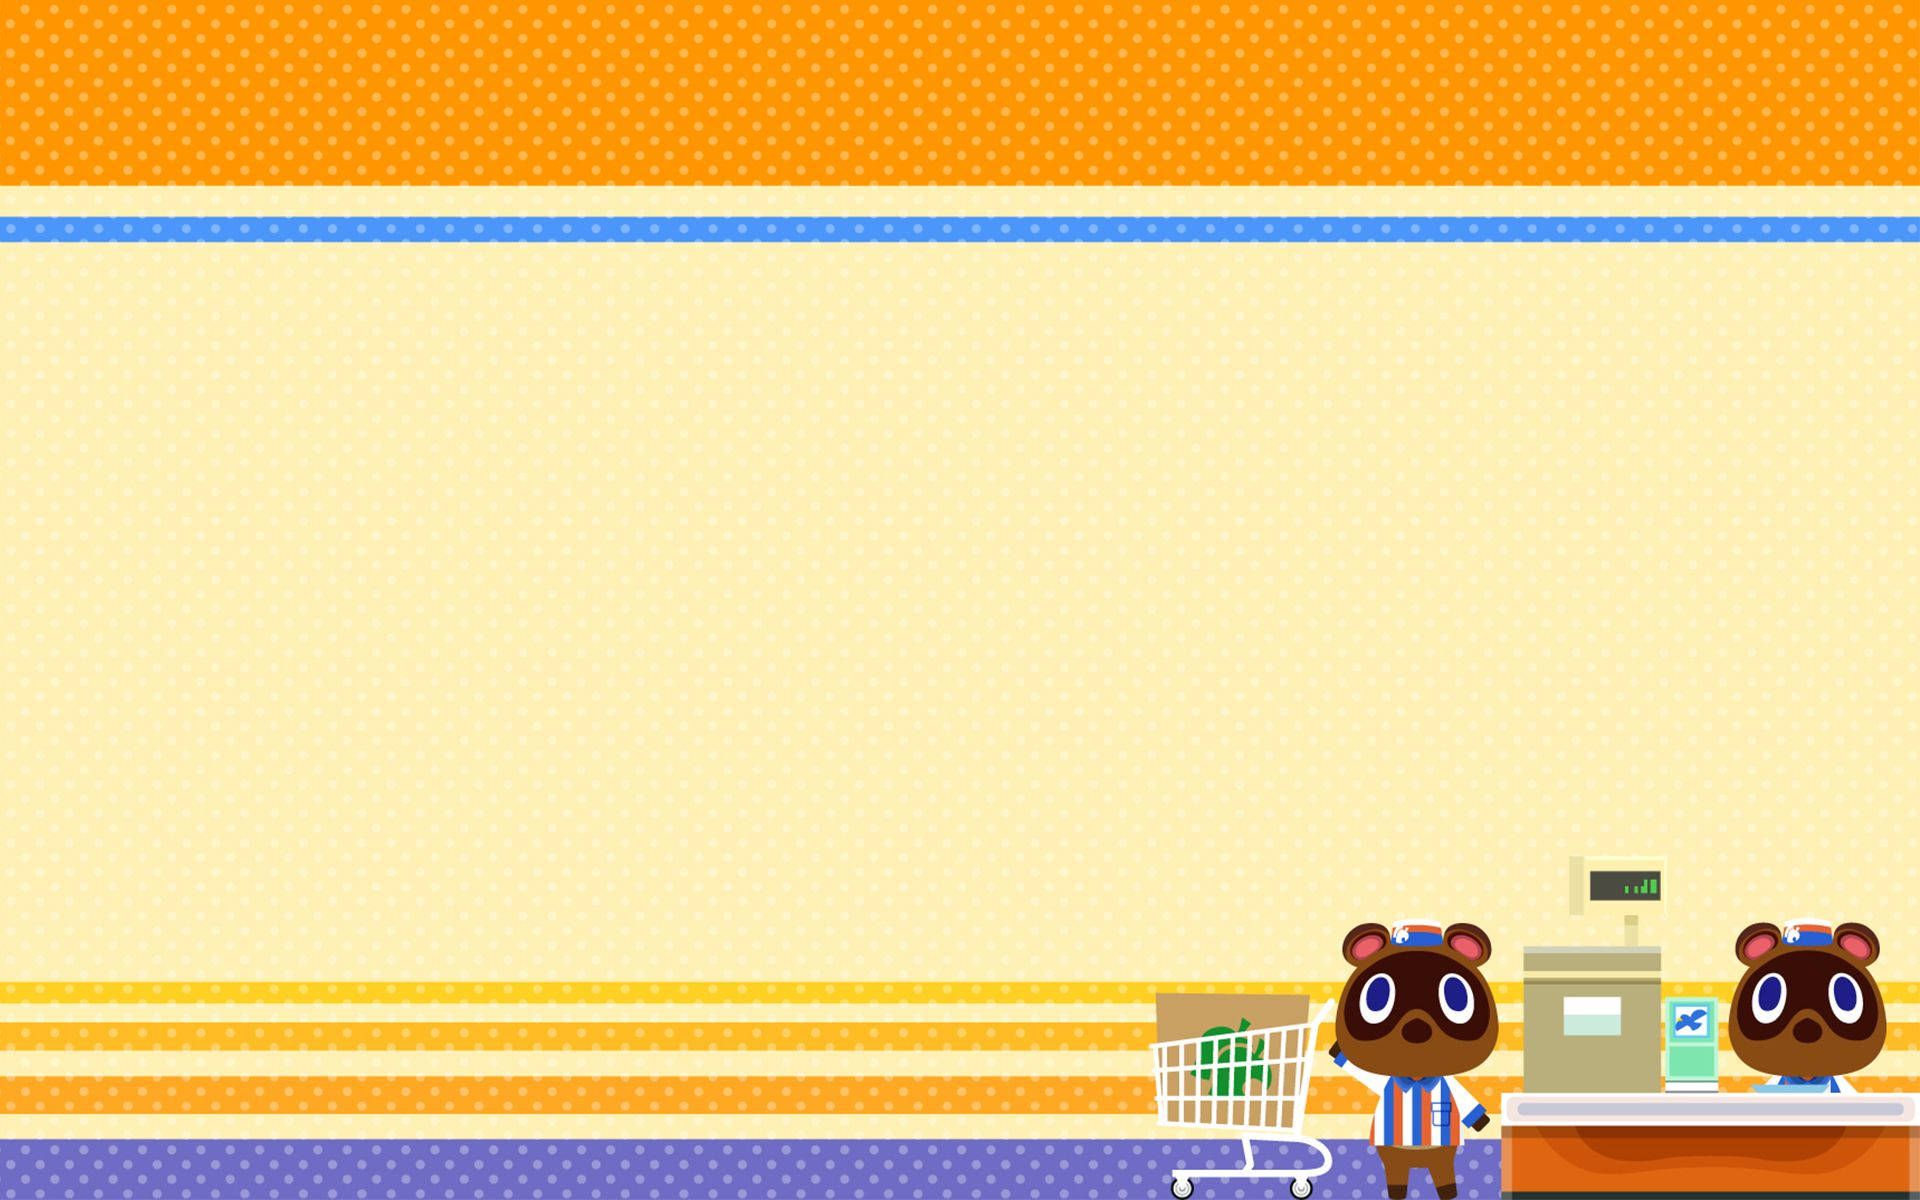 Animal Crossing background with Tom Nook and a shopping cart - Animal Crossing